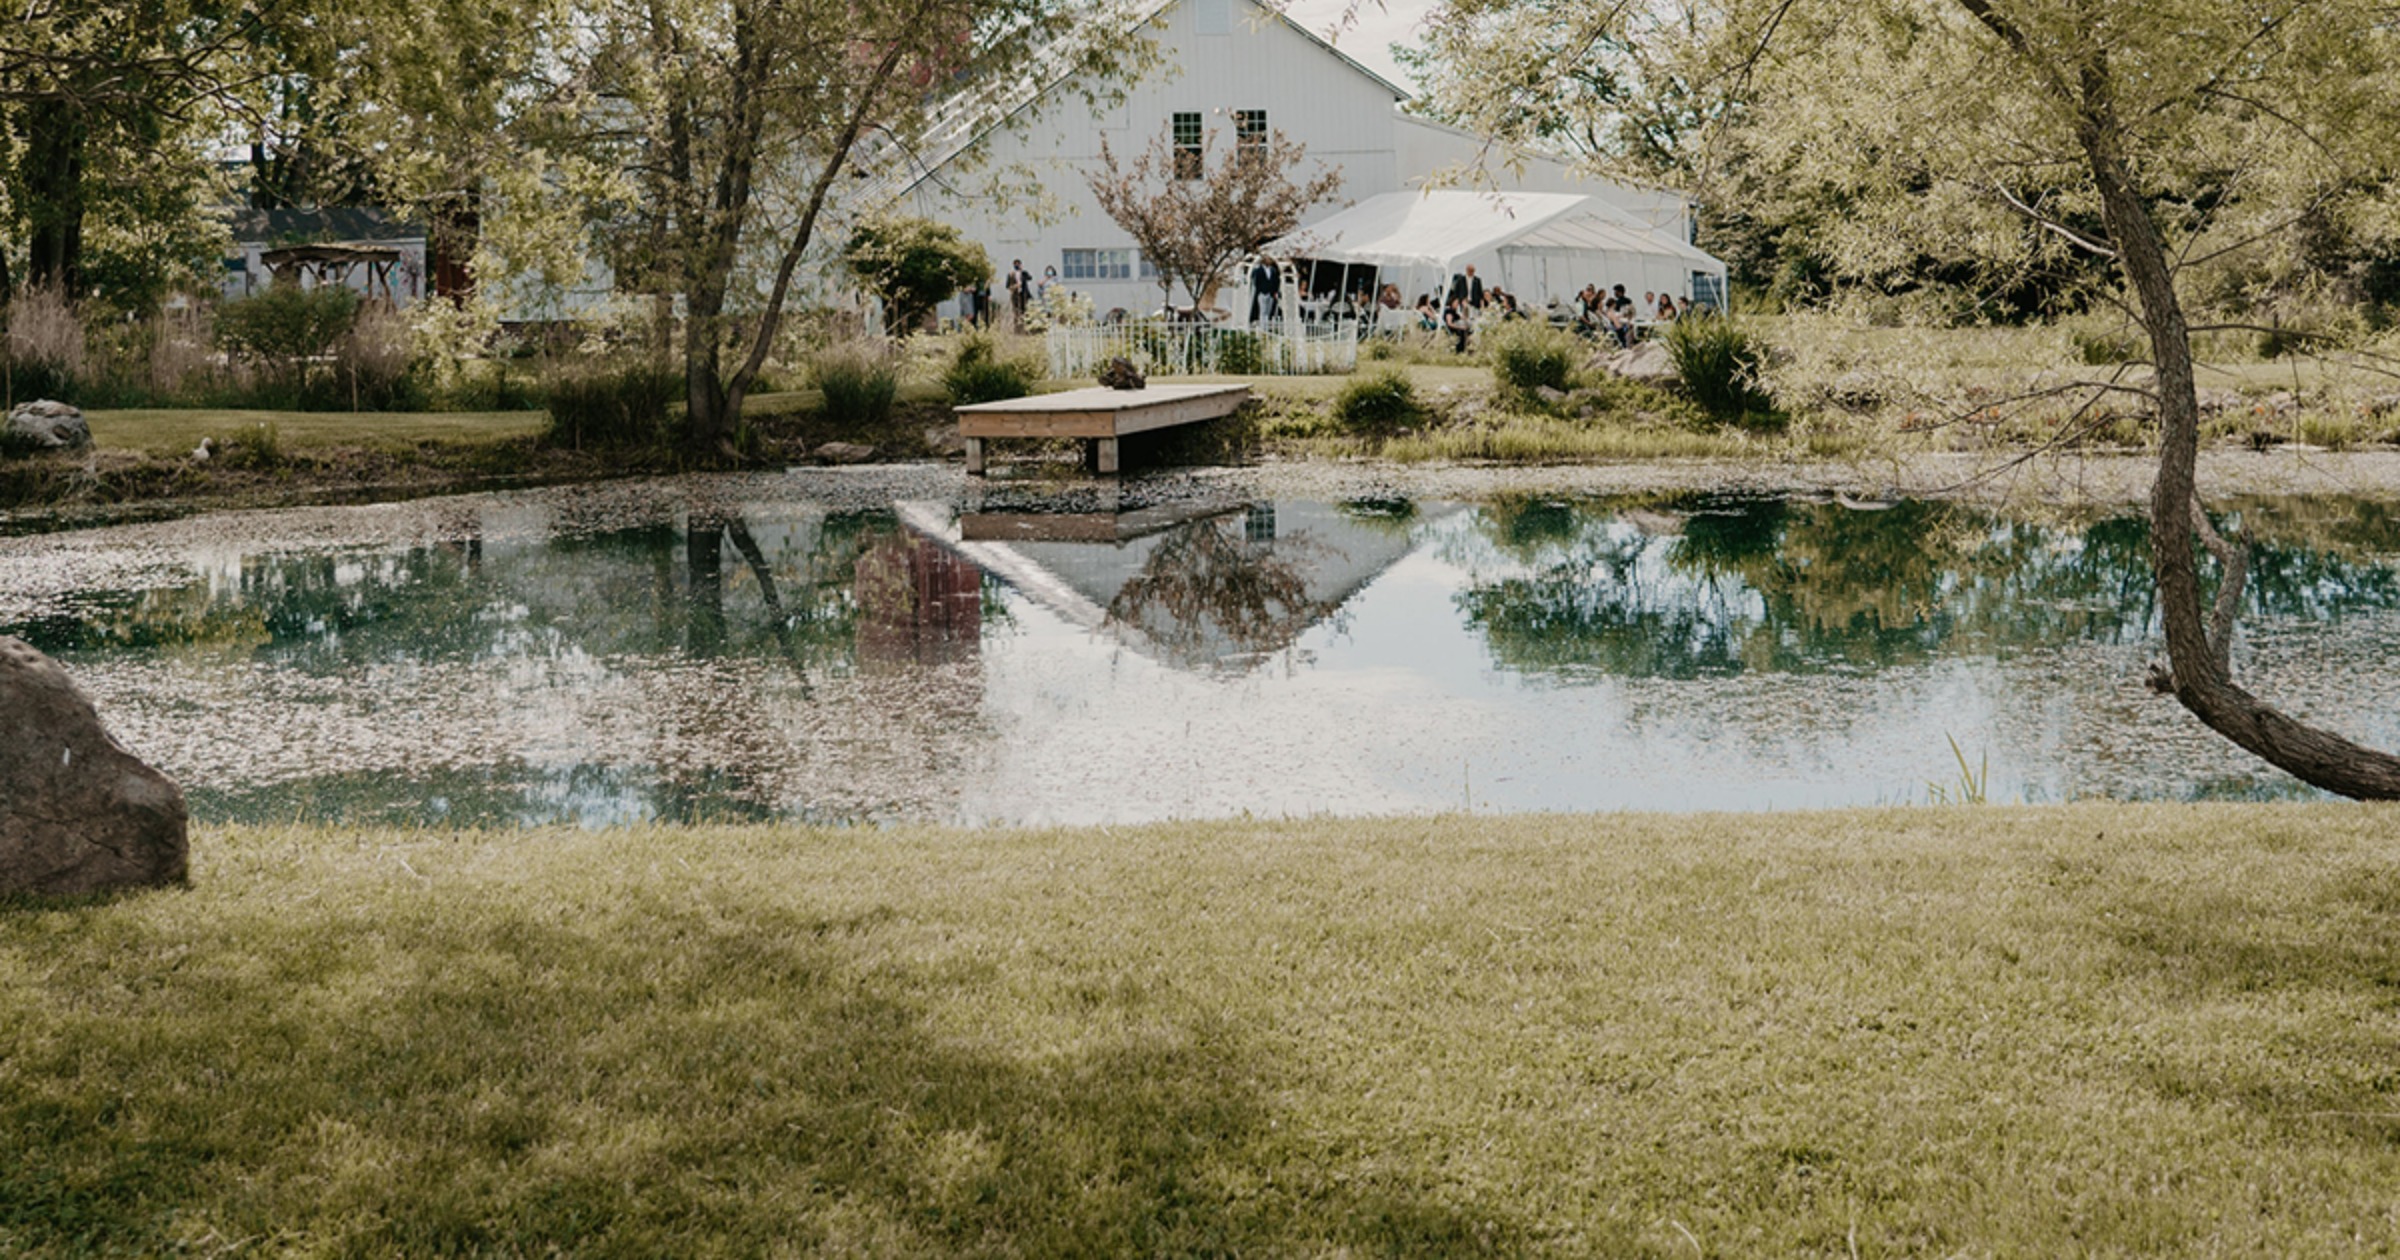 This Ohio farmhouse is perfect for a rustic & romantic wedding